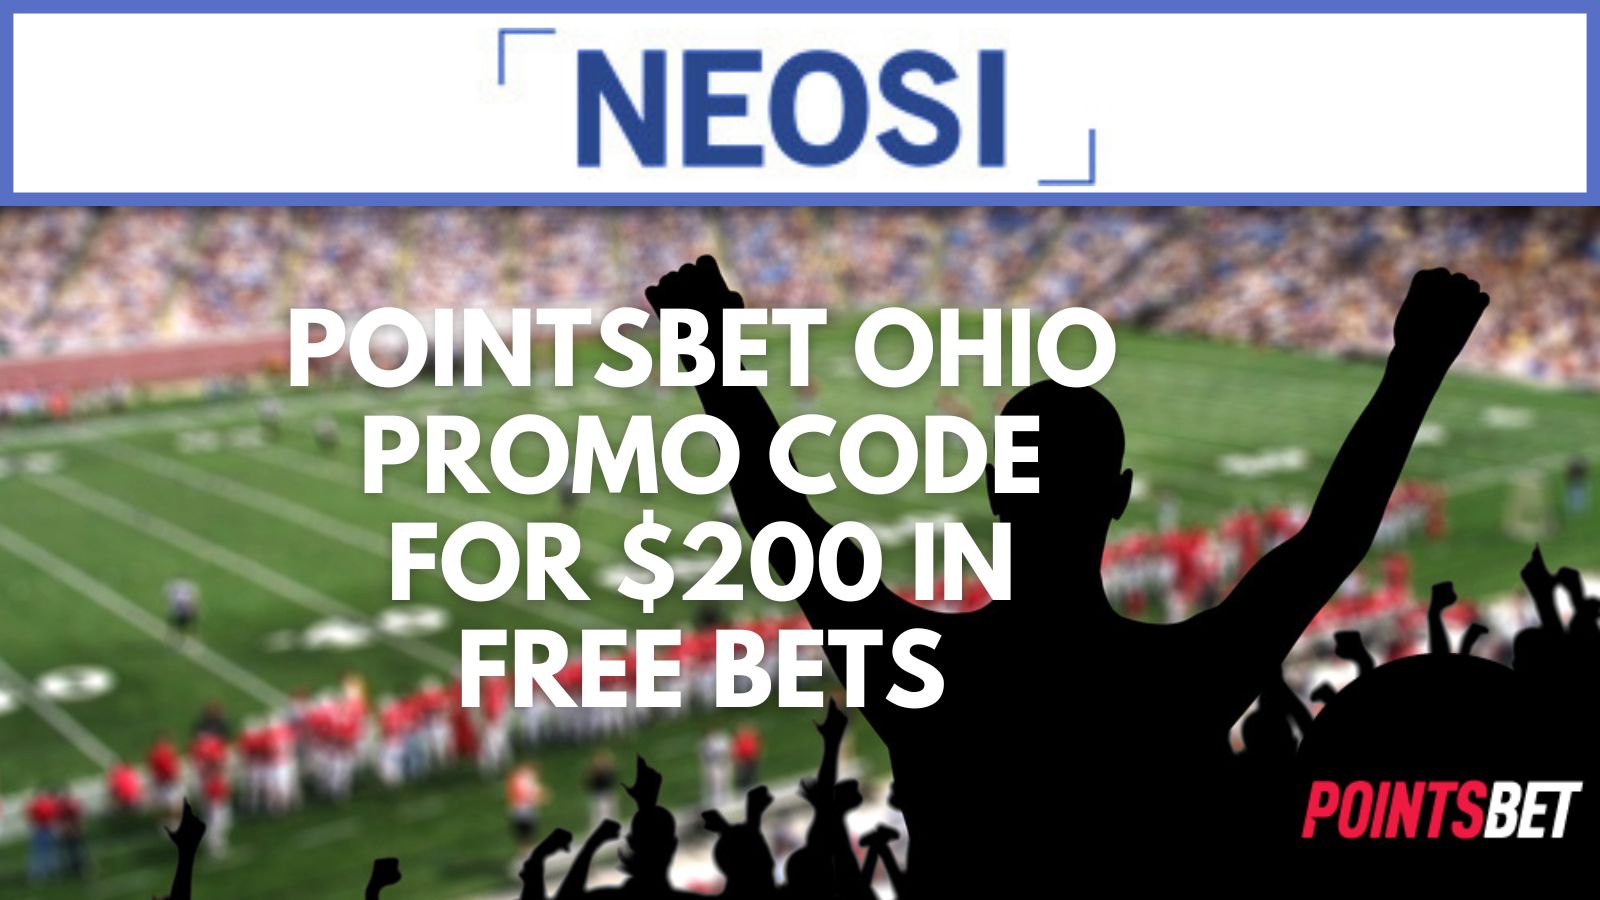 PointsBet Ohio Promo Code For $200 In Free Bets